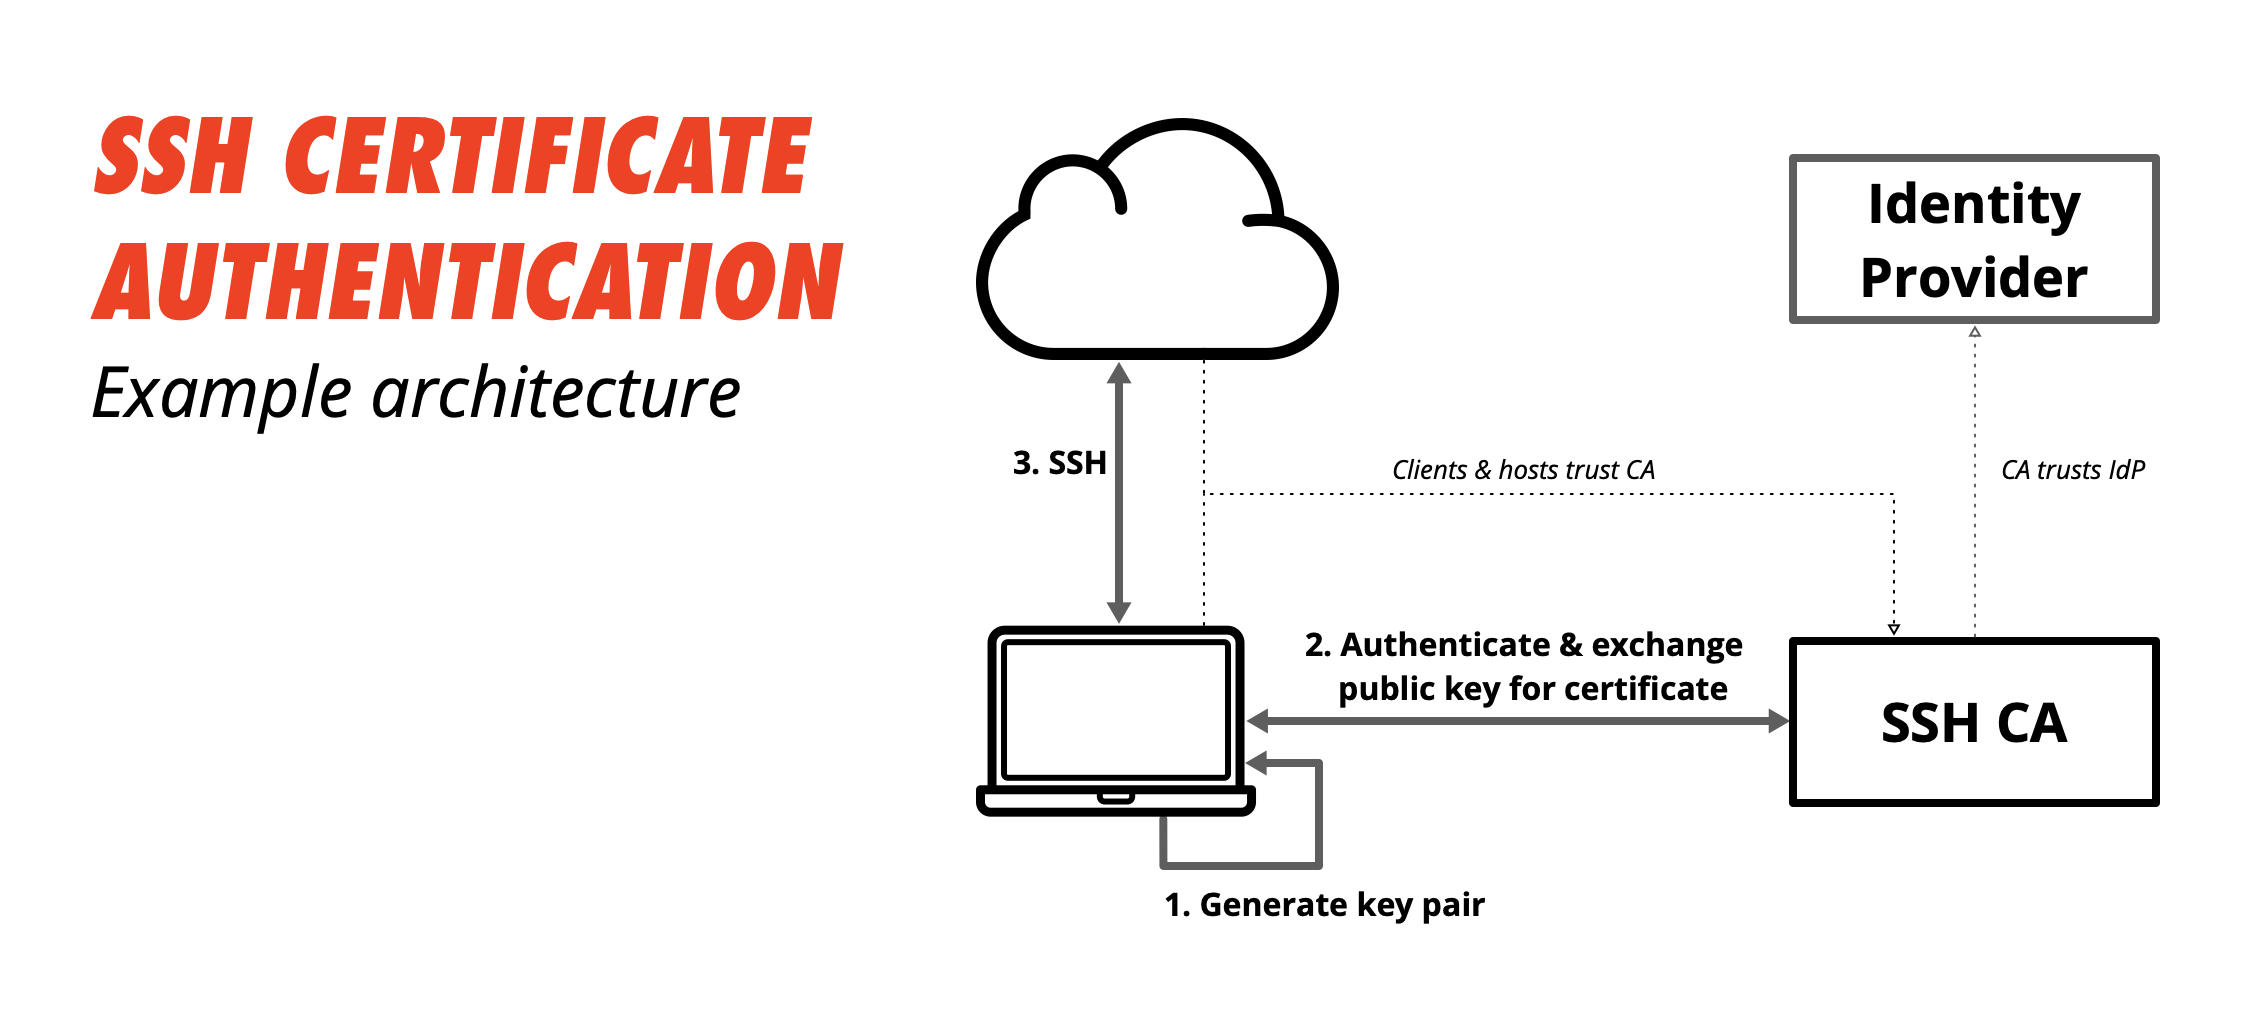 SSH Certificate Authentication - Example Architecture